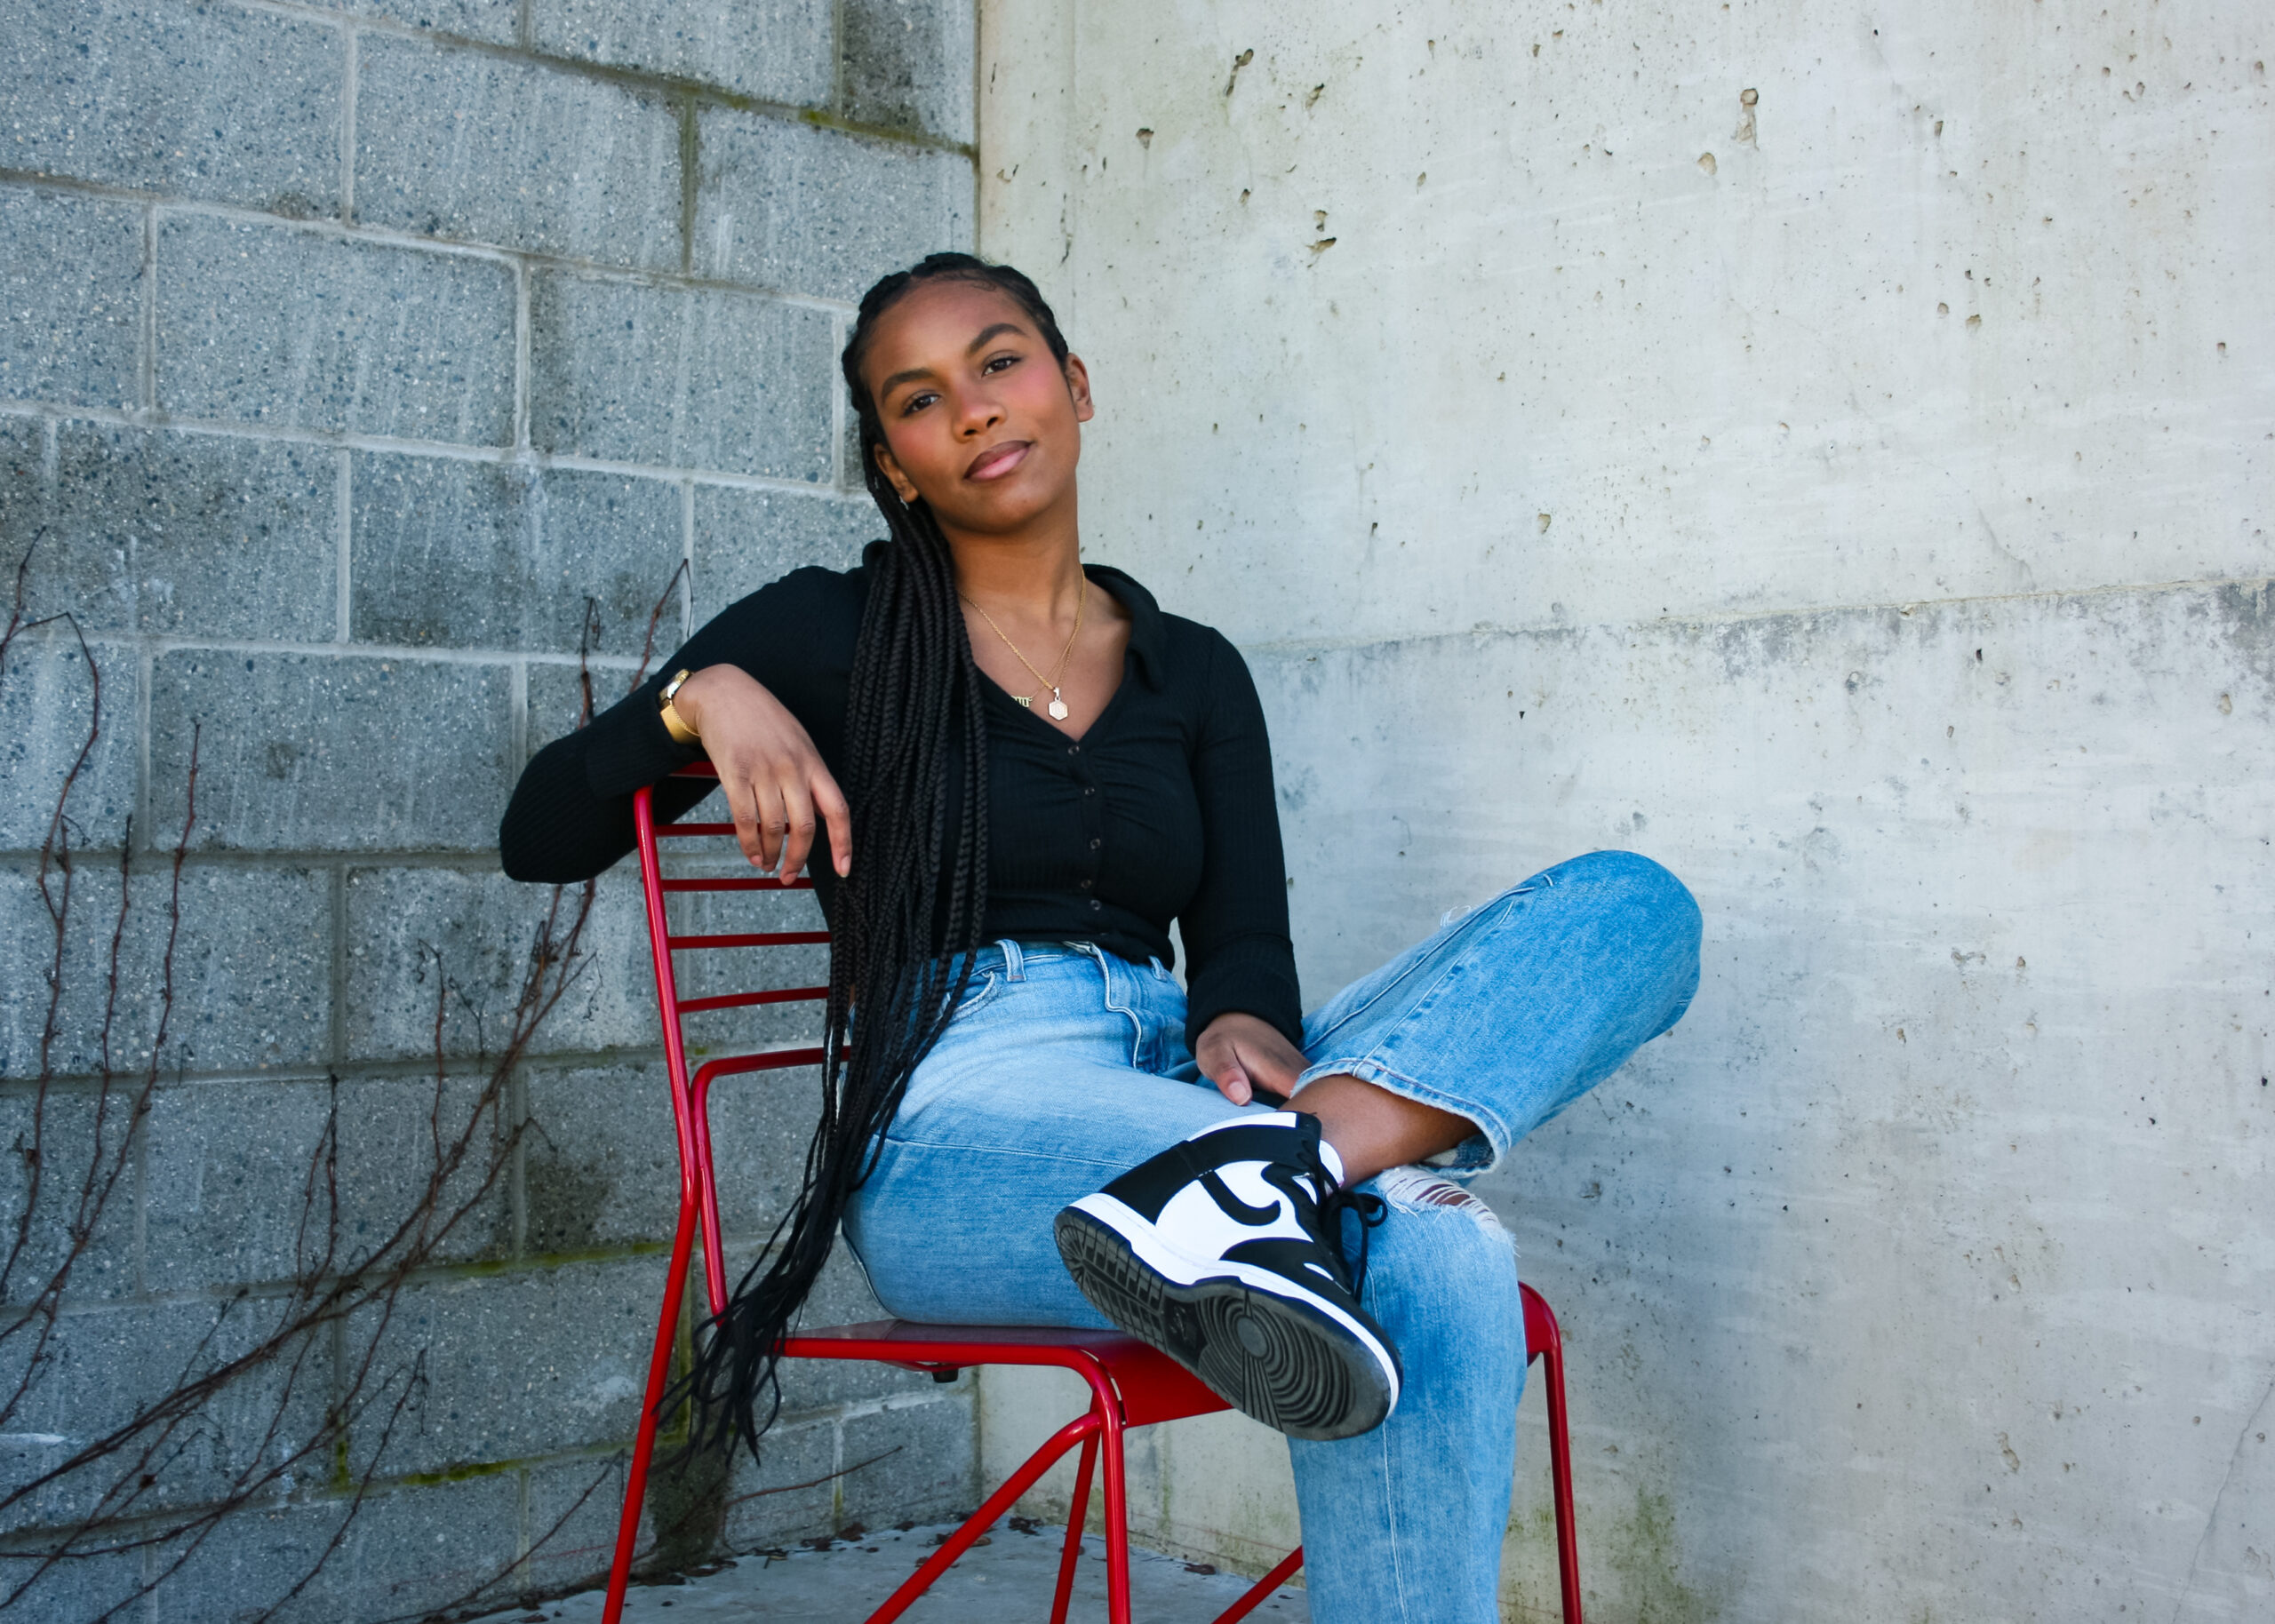 Linda, a Black-Filipinx woman, sits in a red chair, legs crossed, with brick and concrete walls behind her. One arm is draped over the back of the chair as she stares straight at the camera.